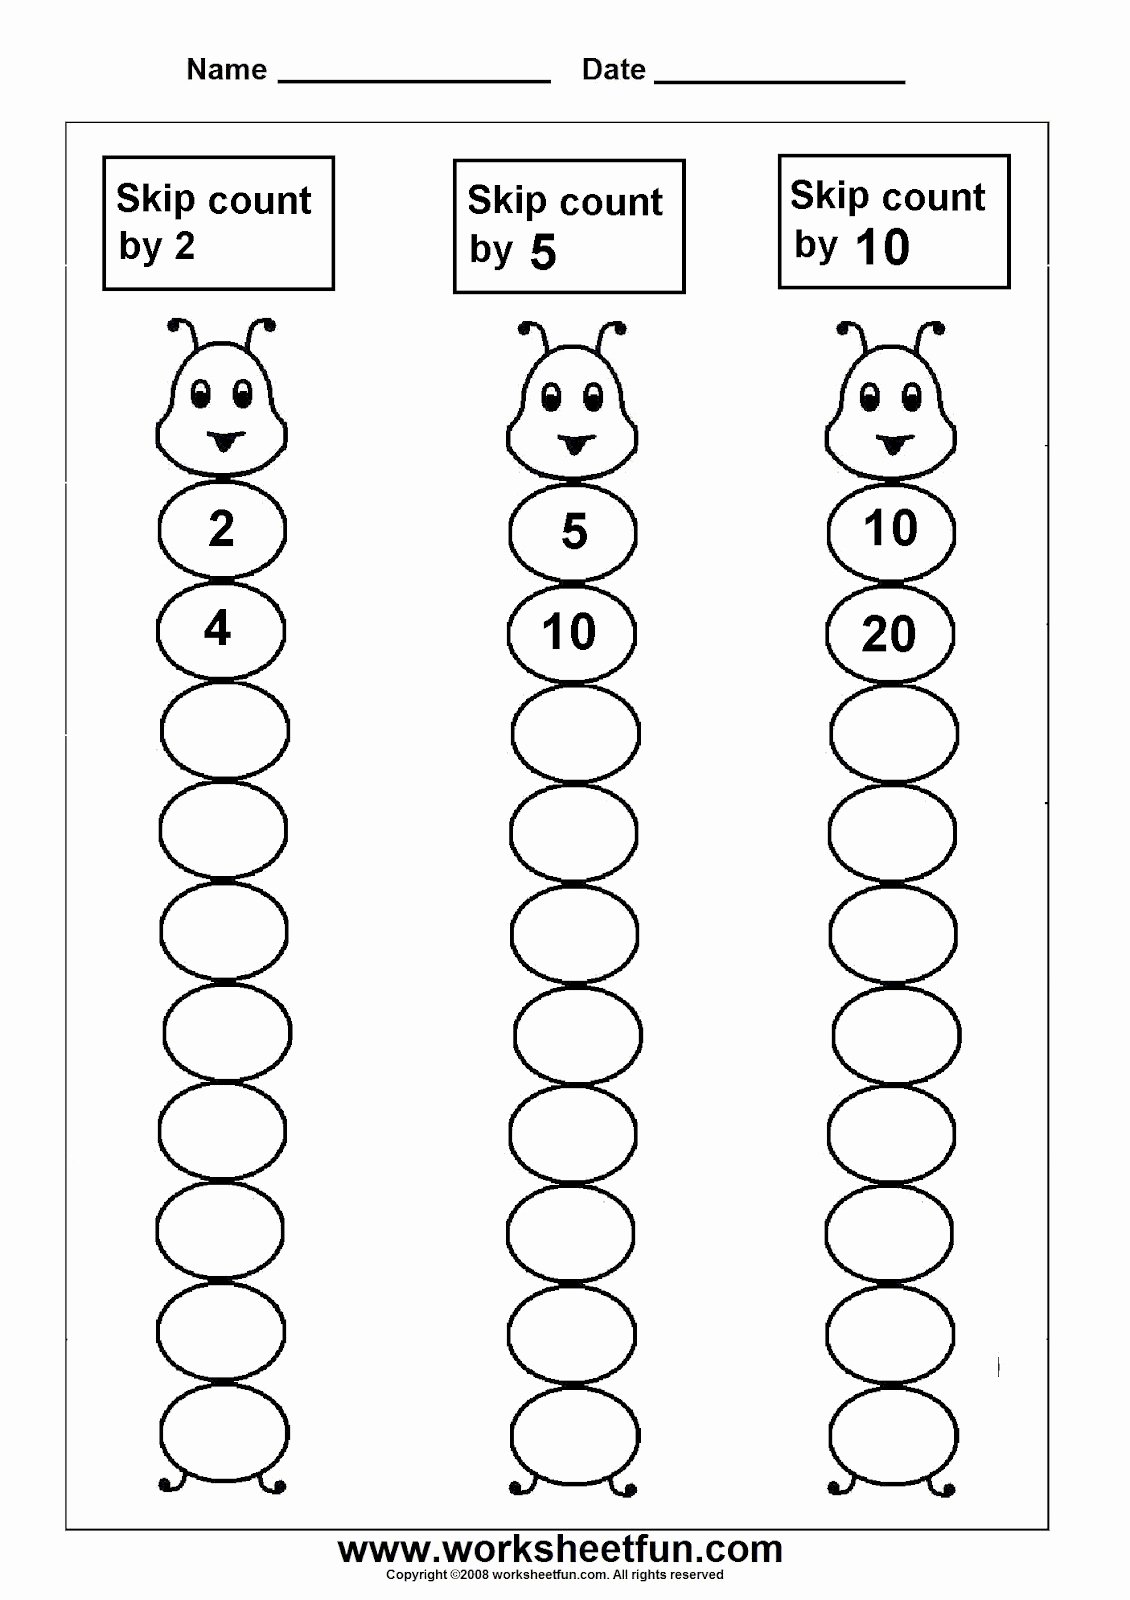 Counting In 10s Worksheet New Math